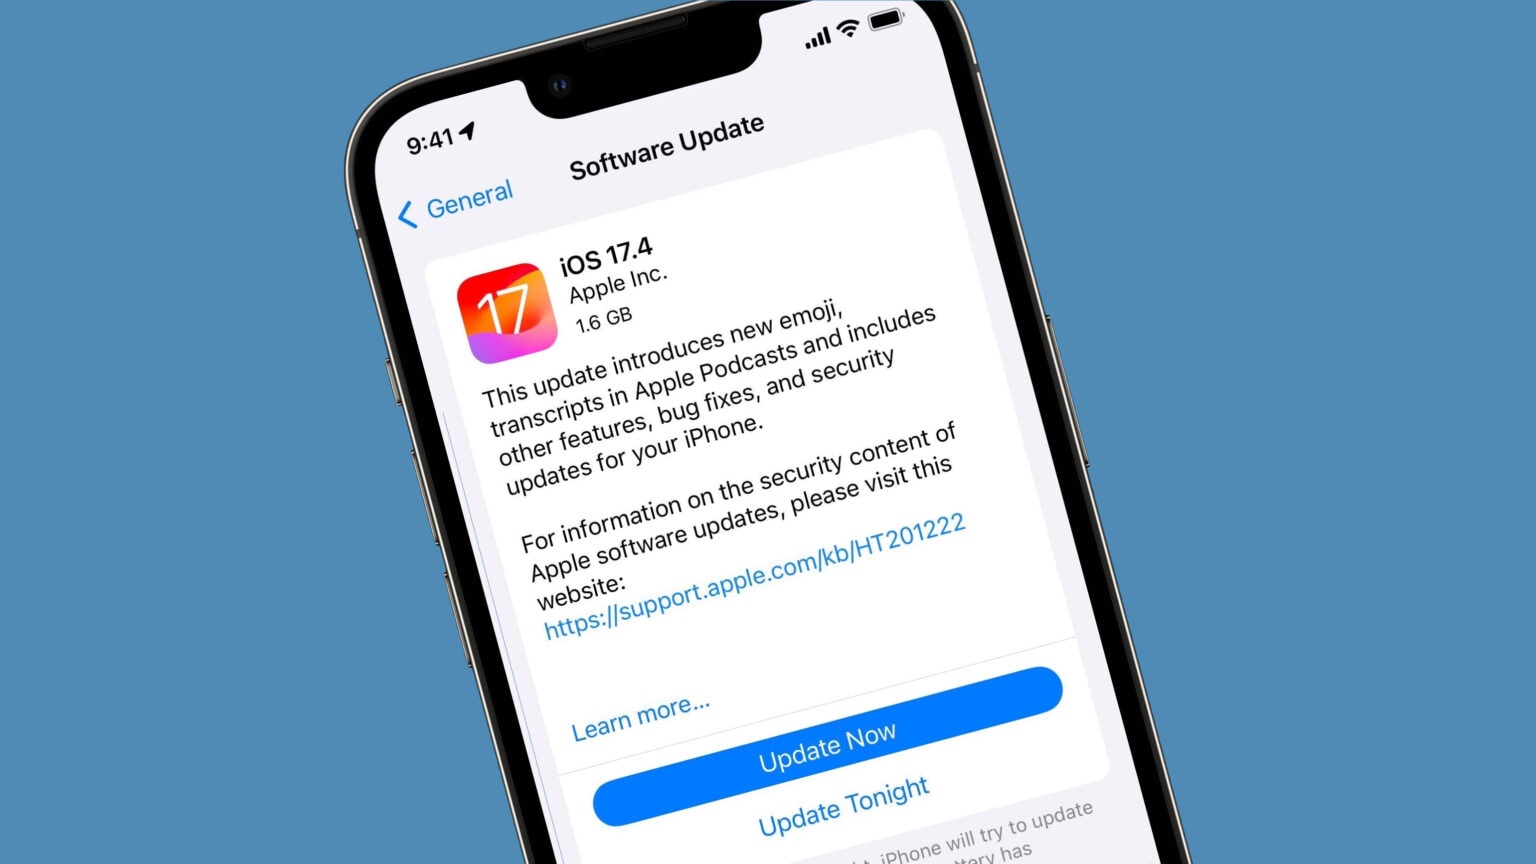 iOS 17.4 release notes